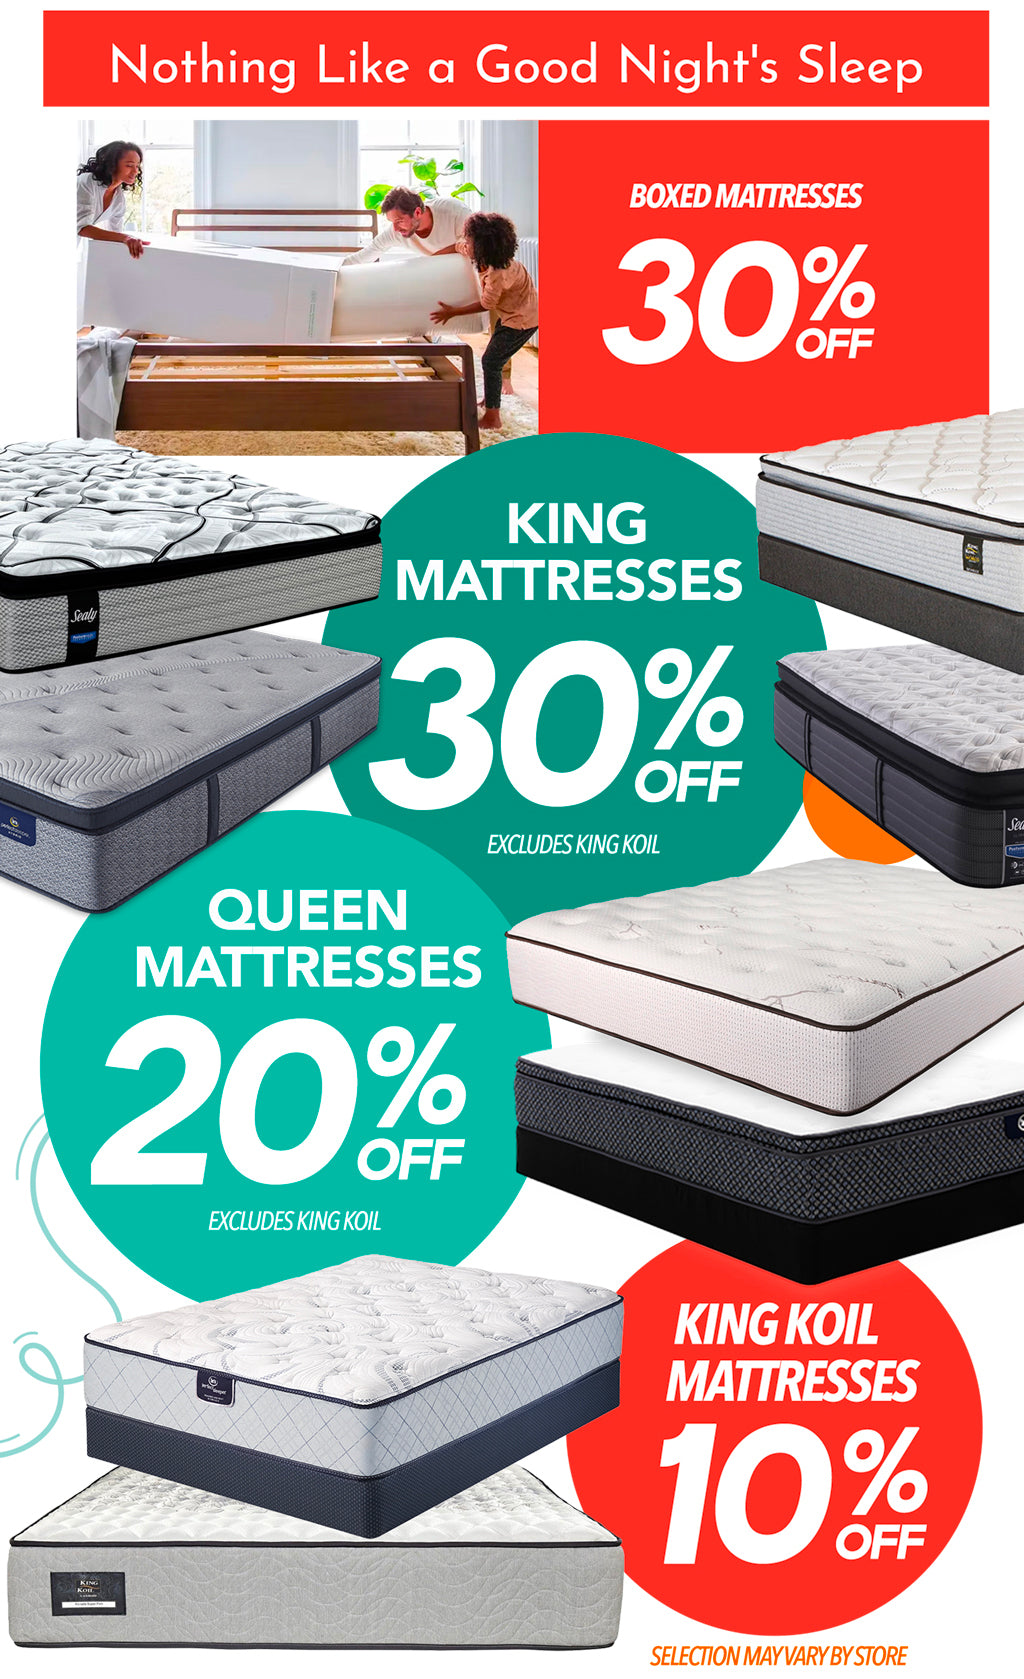 NOTHING LIKE A GOOD NIGHT' SLEEP! BOXED MATTRESSES 30%OFF, KING MATTRESSES 30%OFF, QUEEN MATTRESSES 20%OFF AND KING KOIL MATTRESSES 10%OFF